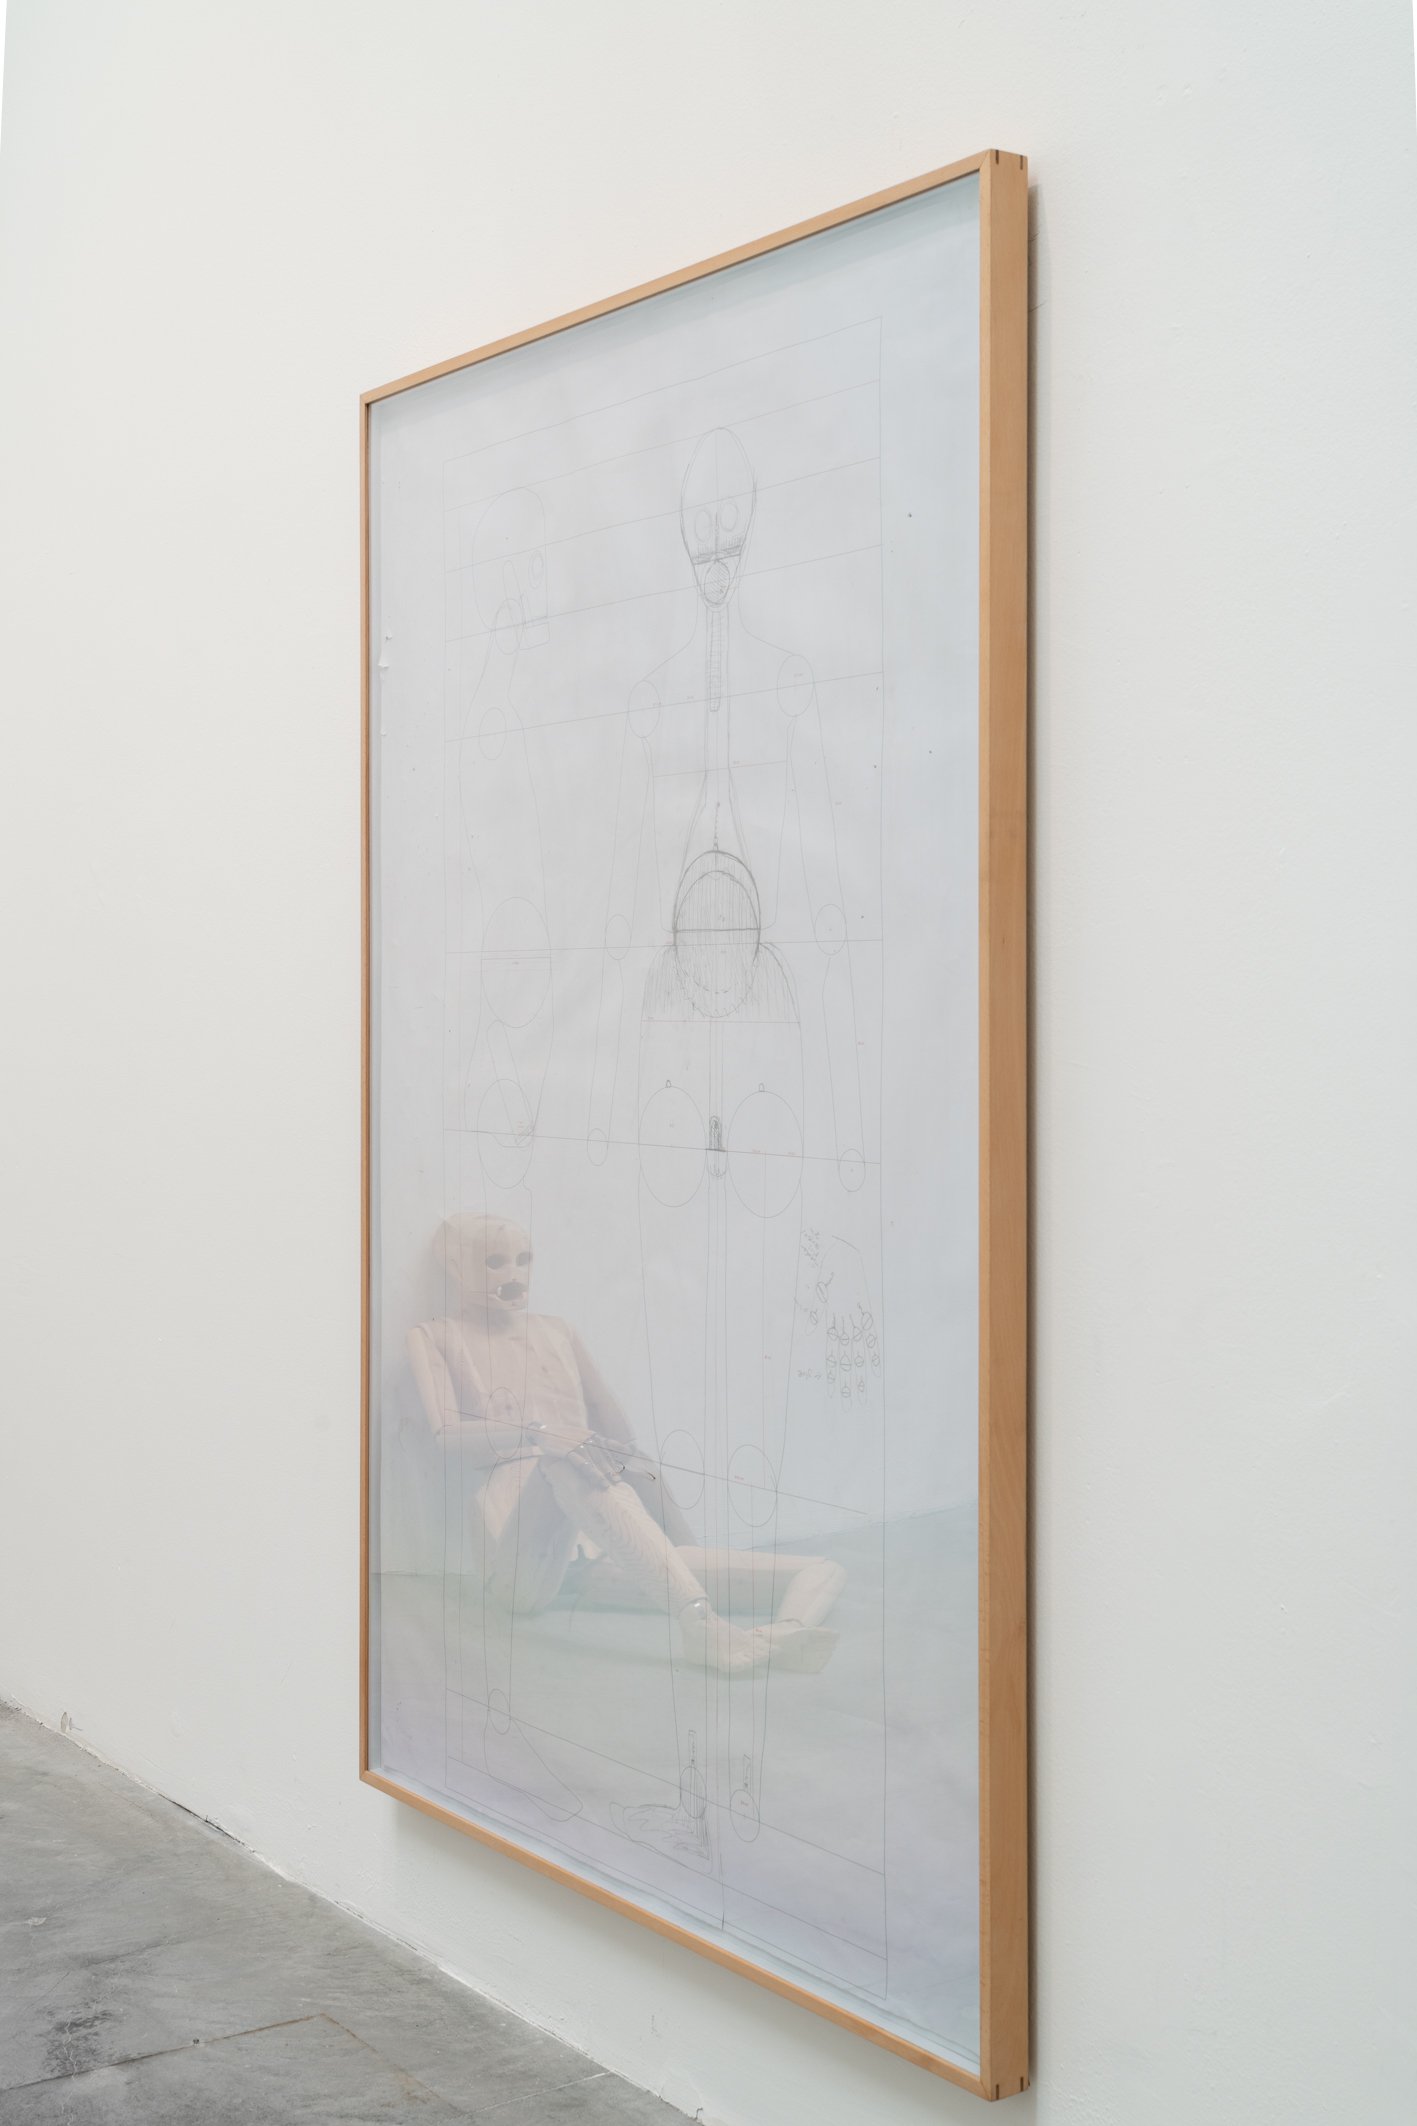 Sidsel Meineche Hansen, Untitled (blueprint for sex robot), technical drawing printed on paper, pen and pencil, custom made beech box frame, acid free / reversible mounting, 207 × 144 cm (81 1/2 x 56 3/4 in), 2018. Installation view, The Milk of Dreams, 59th International Art Exhibition – La Biennale di Venezia, Venice, 2022